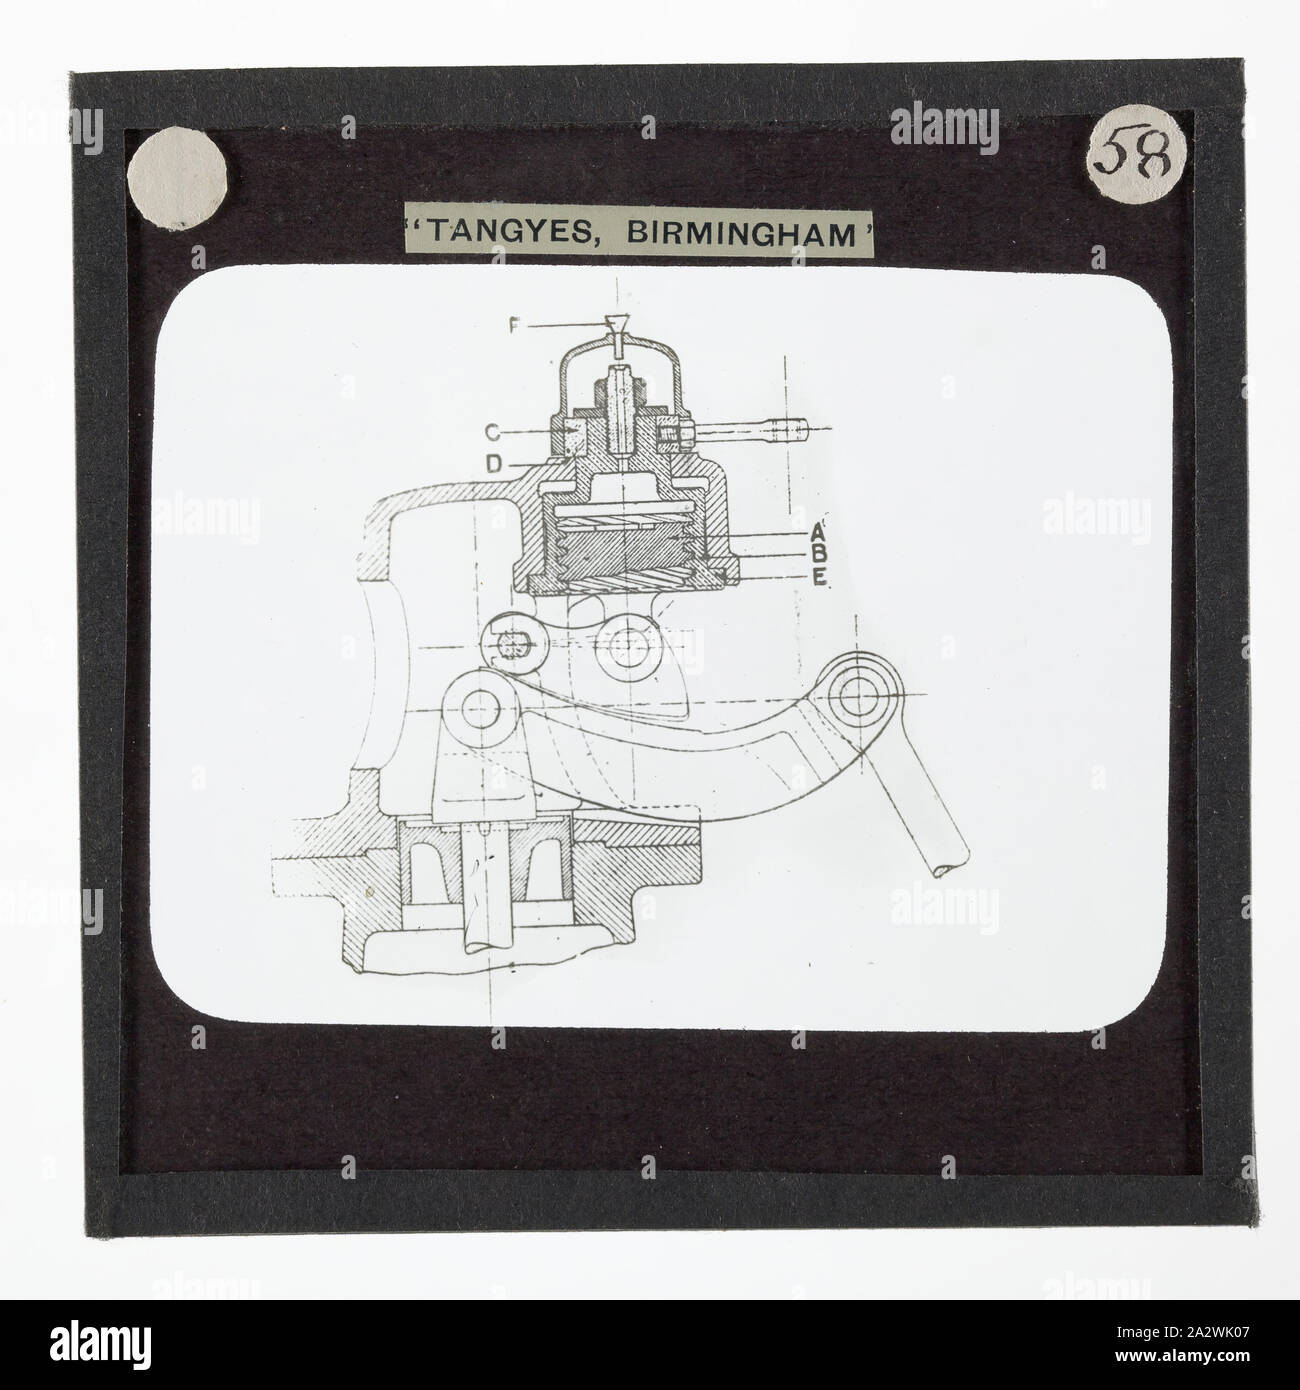 Lantern Slide - Tangyes Ltd, Valve Adjustment Mechanism for Steam Engine, circa 1910, One of 239 glass lantern slides depicting products manufactured by Tangyes Limited engineers of Birmingham, England. The images include various products such as engines, centrifugal pumps, hydraulic pumps, gas producers, materials testing machines, presses, machine tools, hydraulic jacks etc. Tangyes was a company which operated from 1857 to 1957. They produced a wide variety of engineering Stock Photo